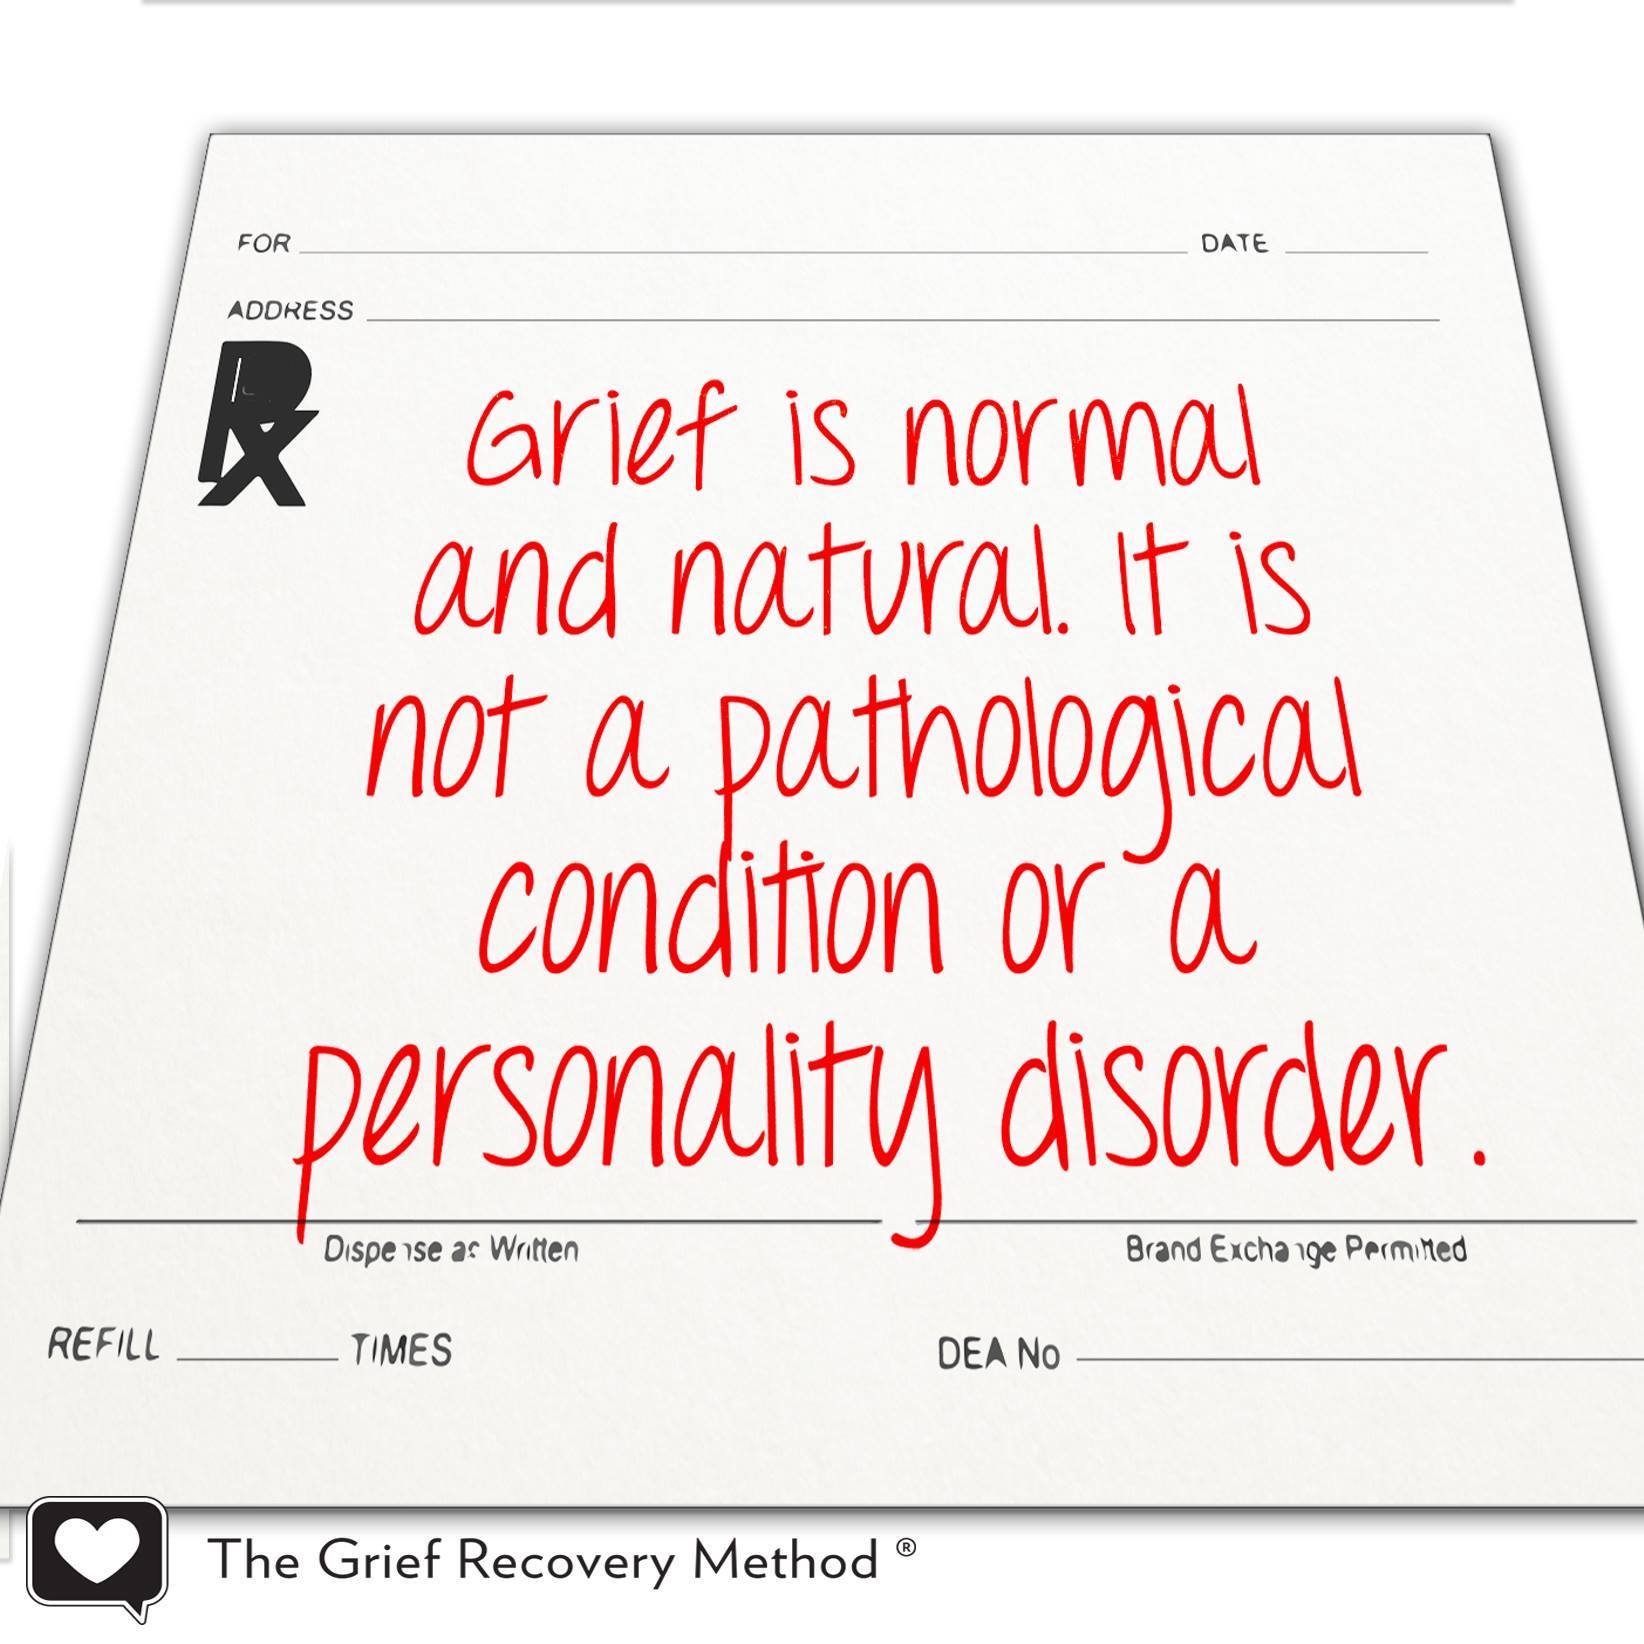 grief is normal and natural not pathological condition or disorder